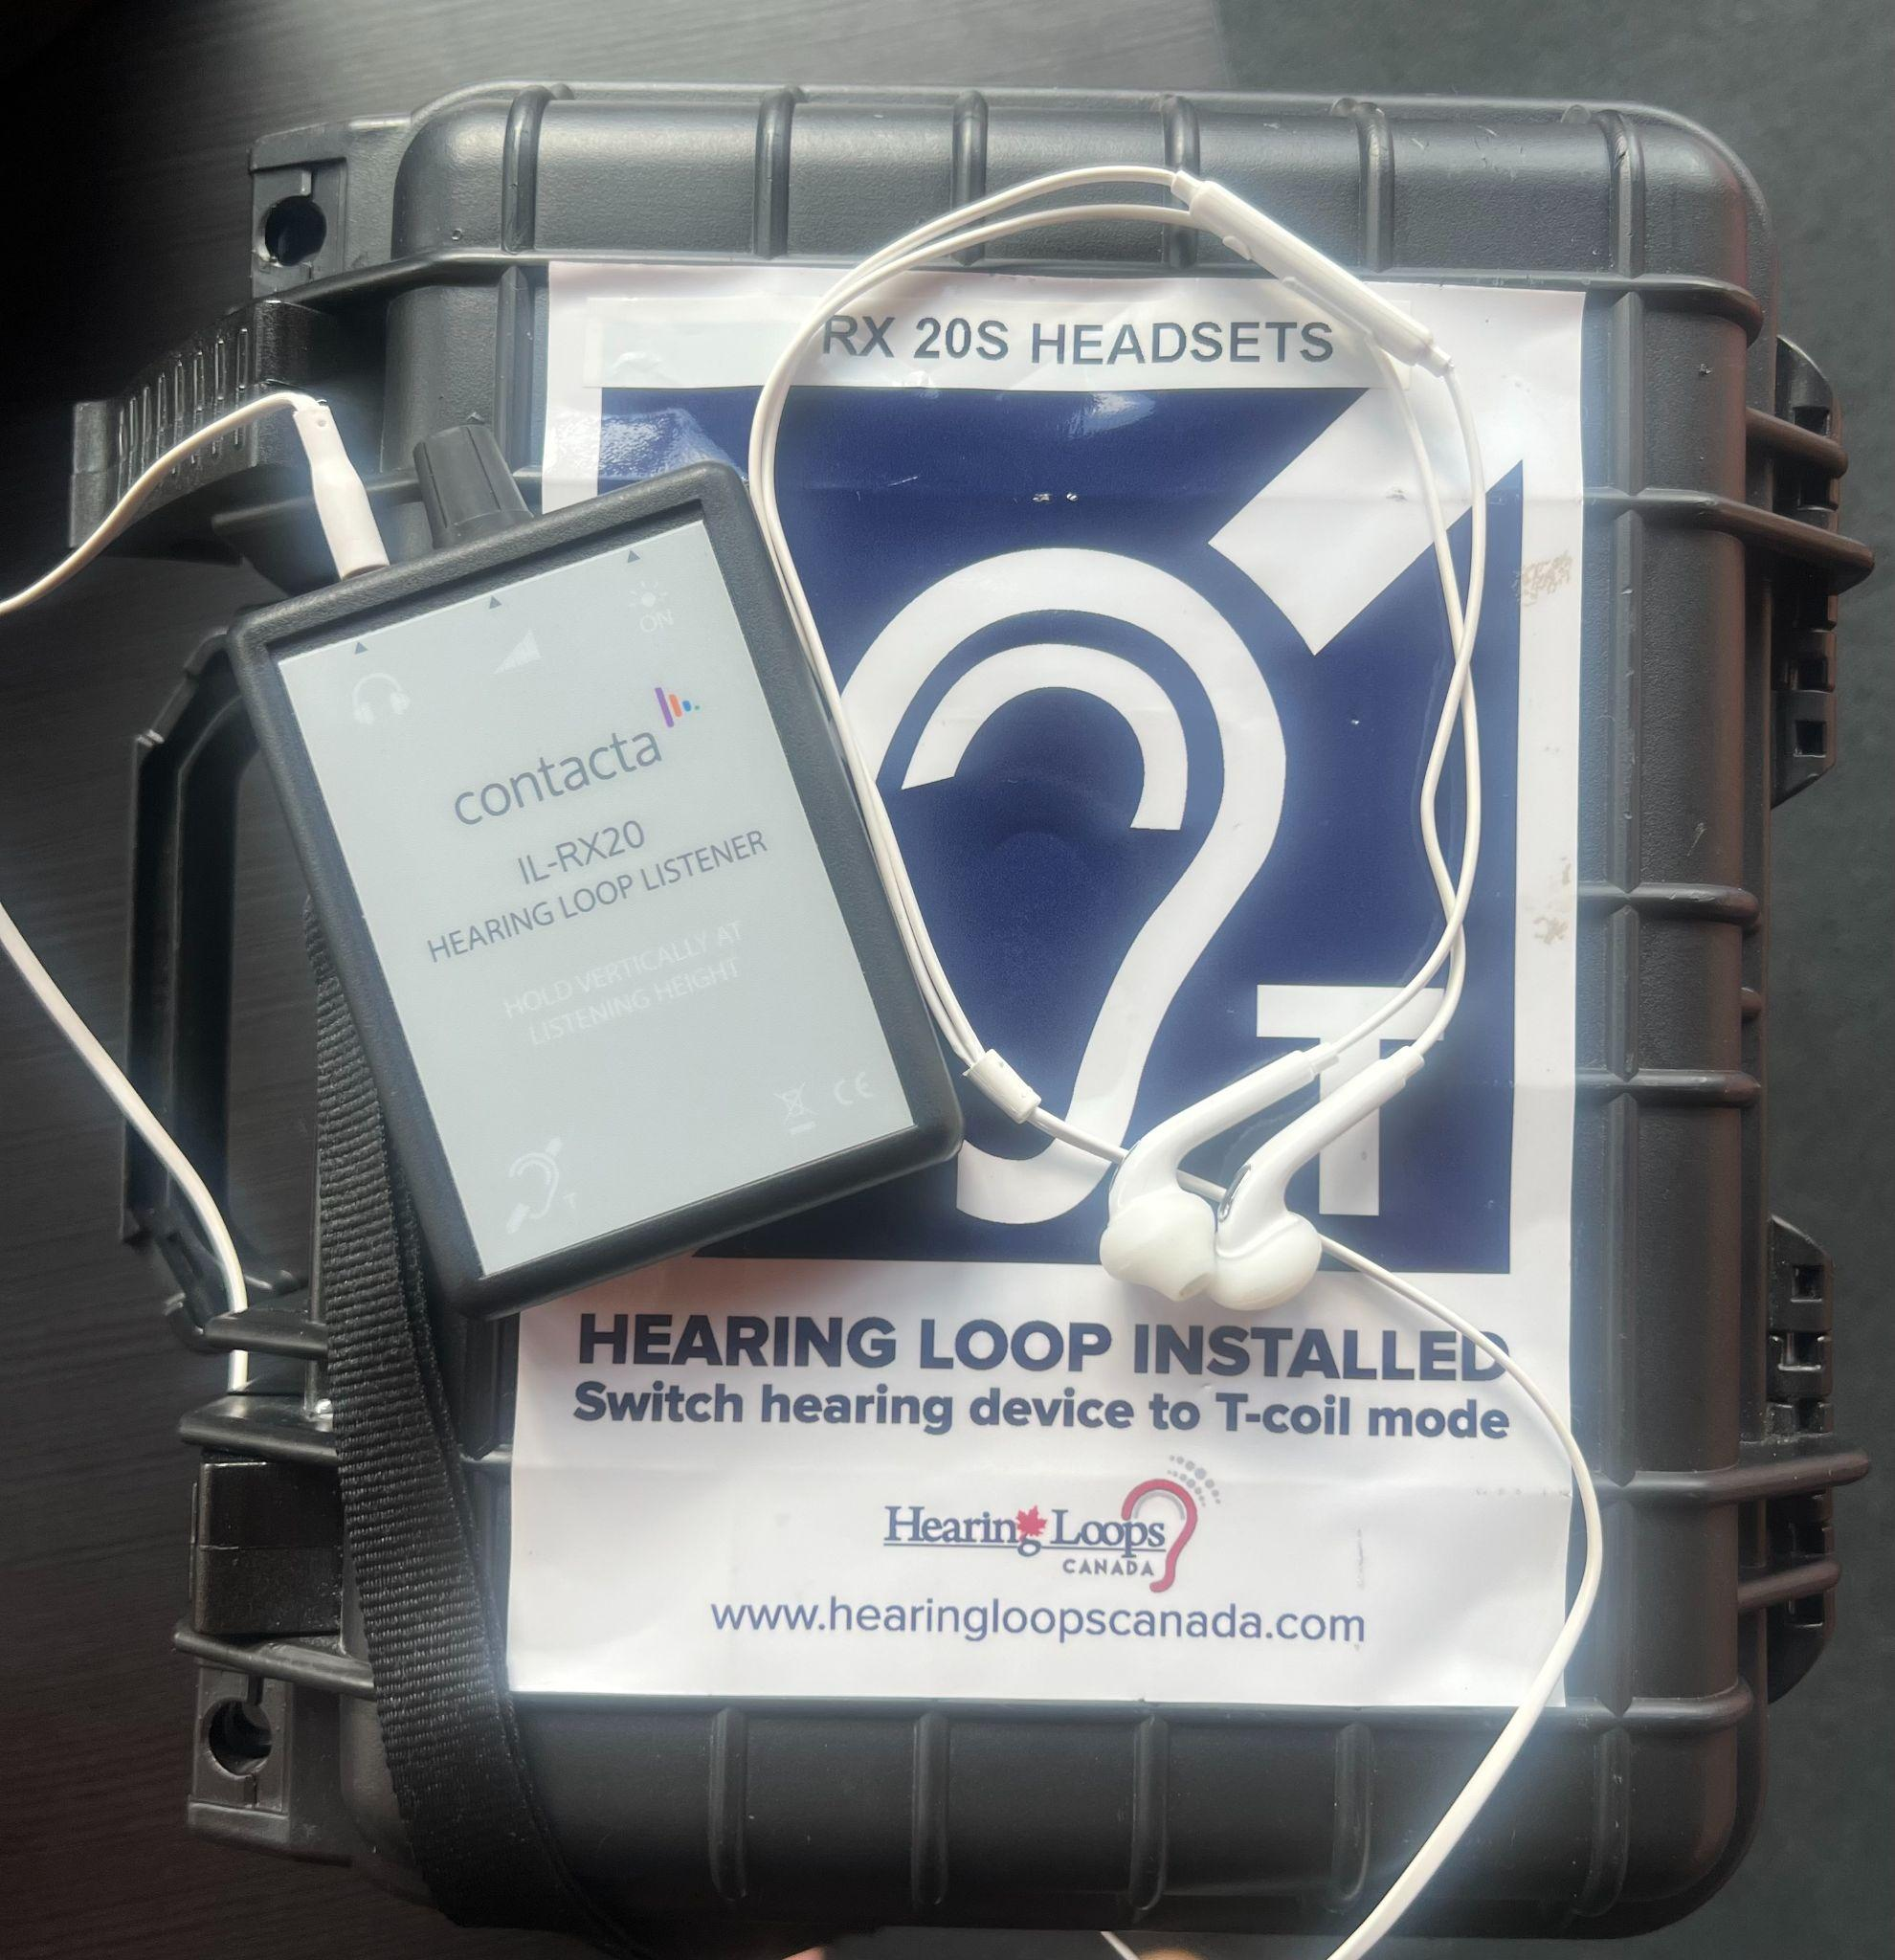 A Shoctor T-Coil Hearing Loop headset which includes earbuds placed on top of the Hearing Loop box.